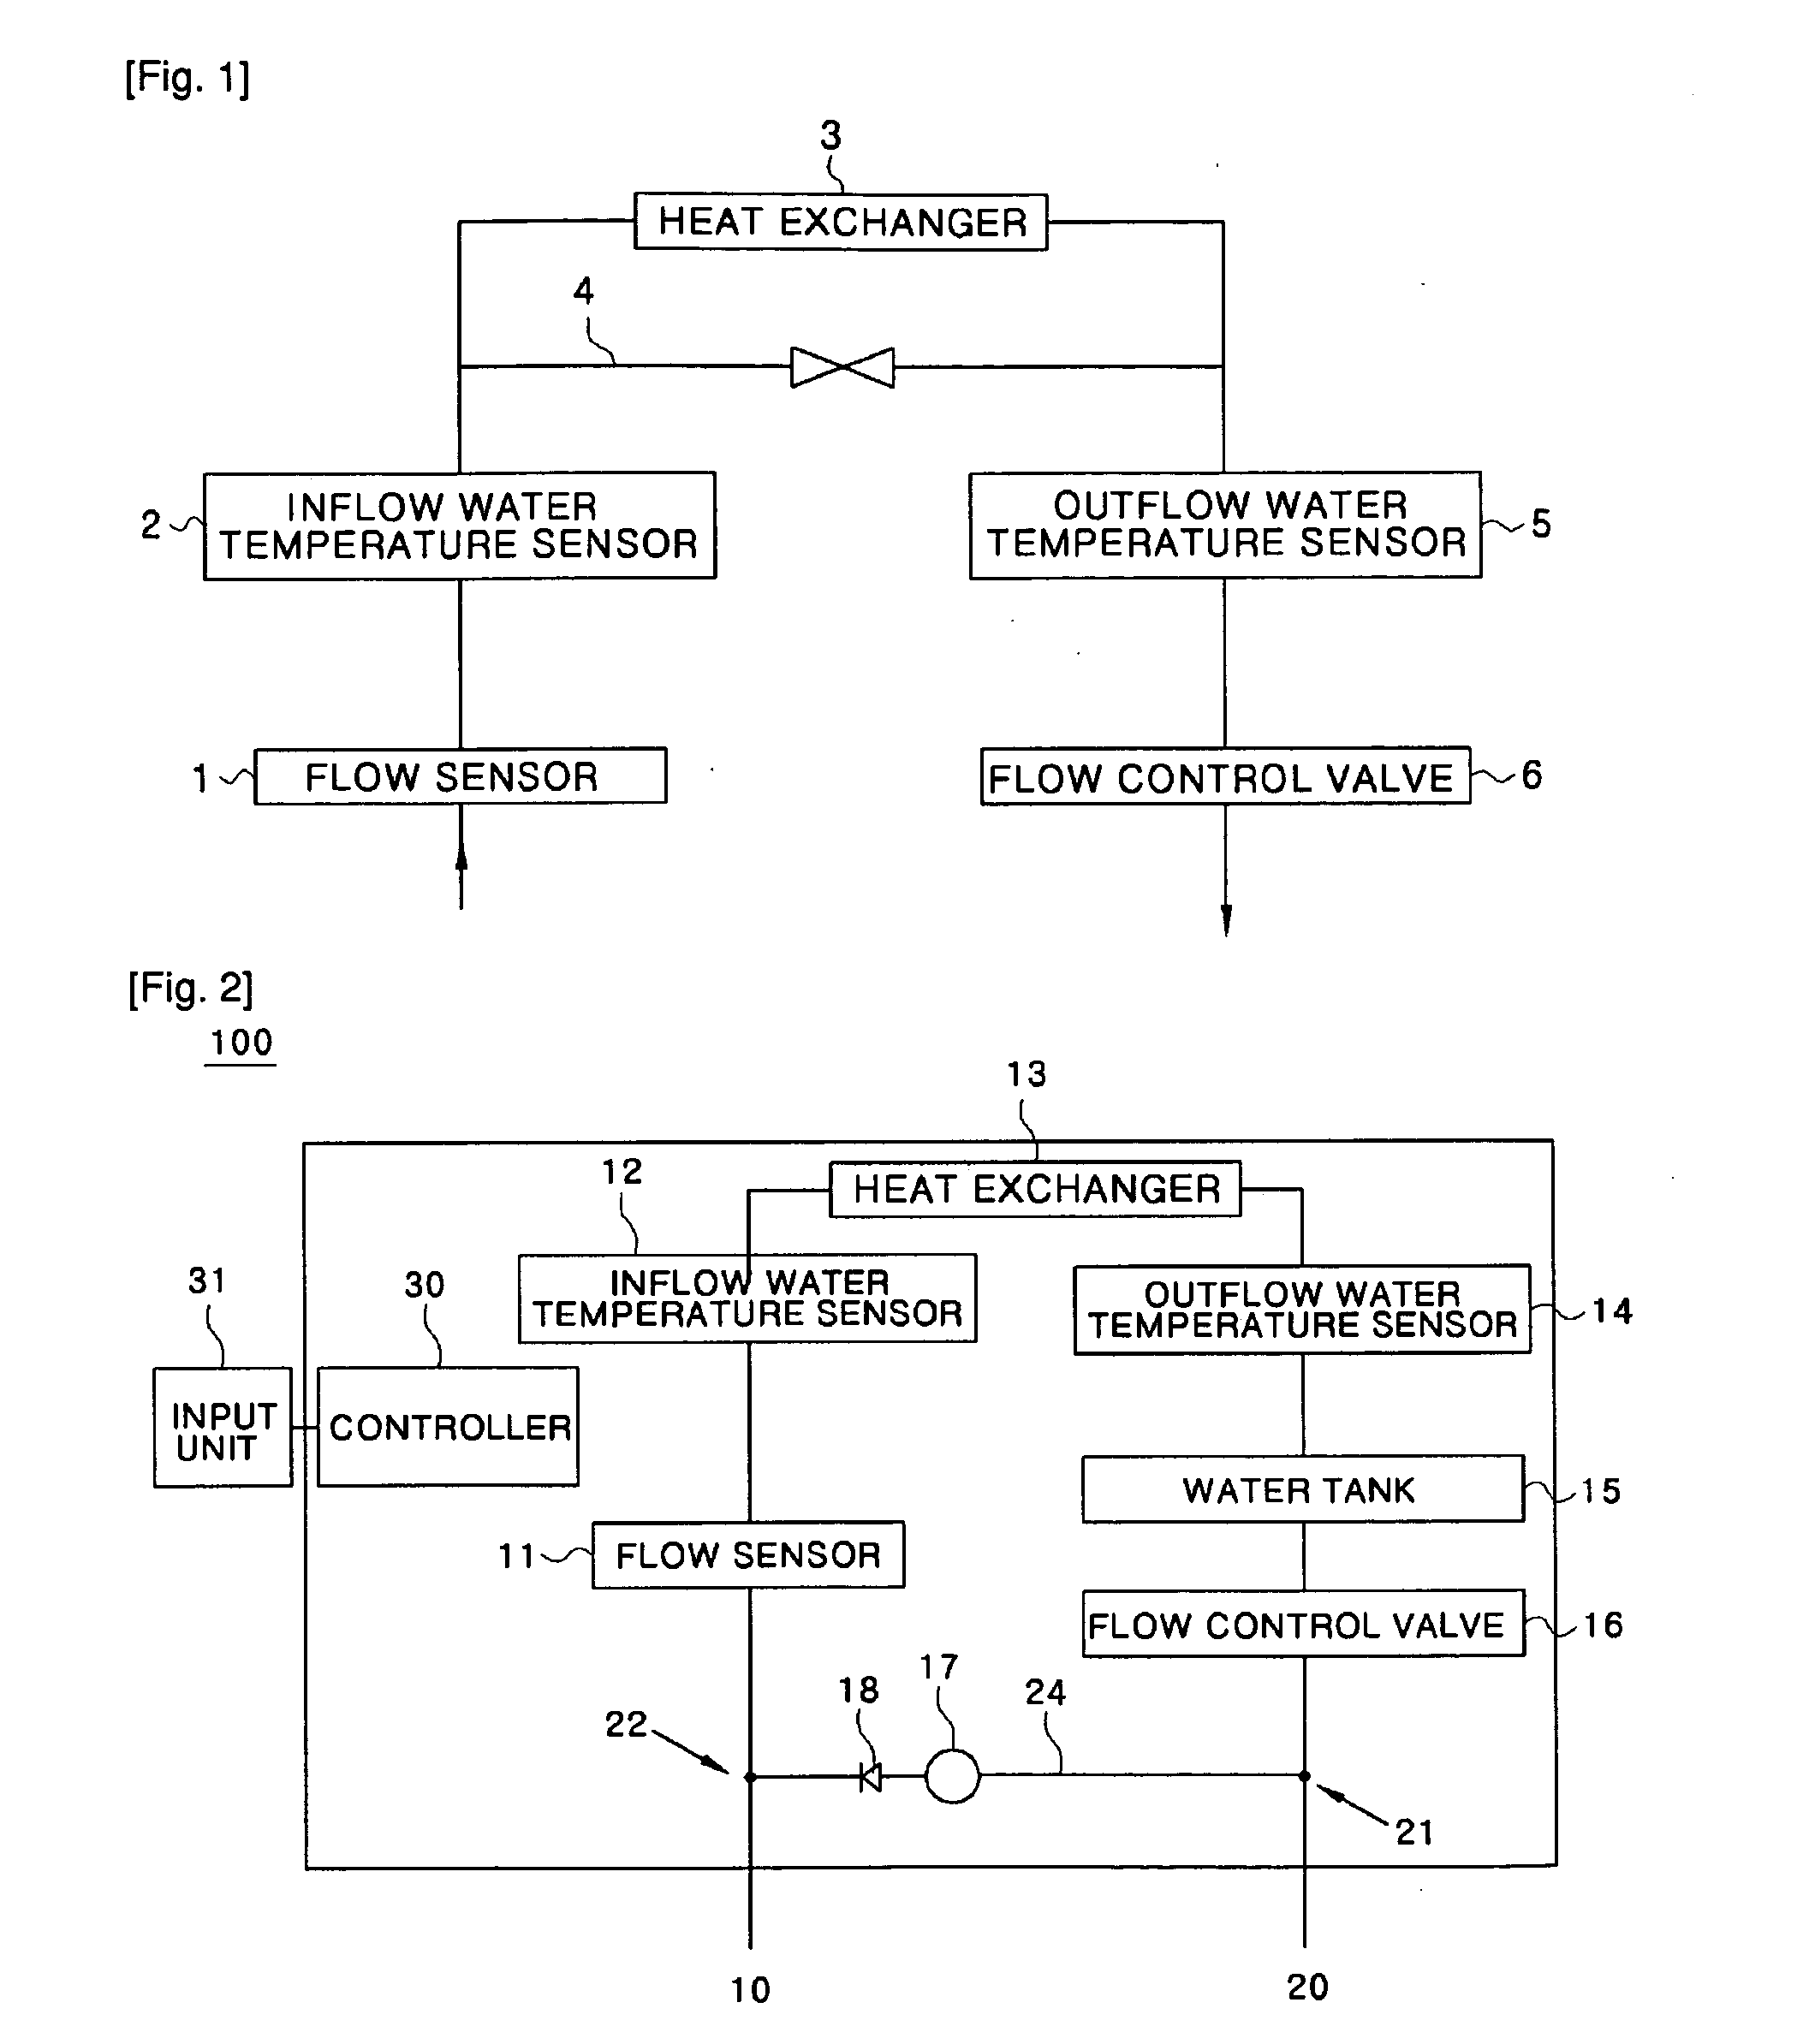 Method for controlling a hot water temperature using low flux in hot water supply system